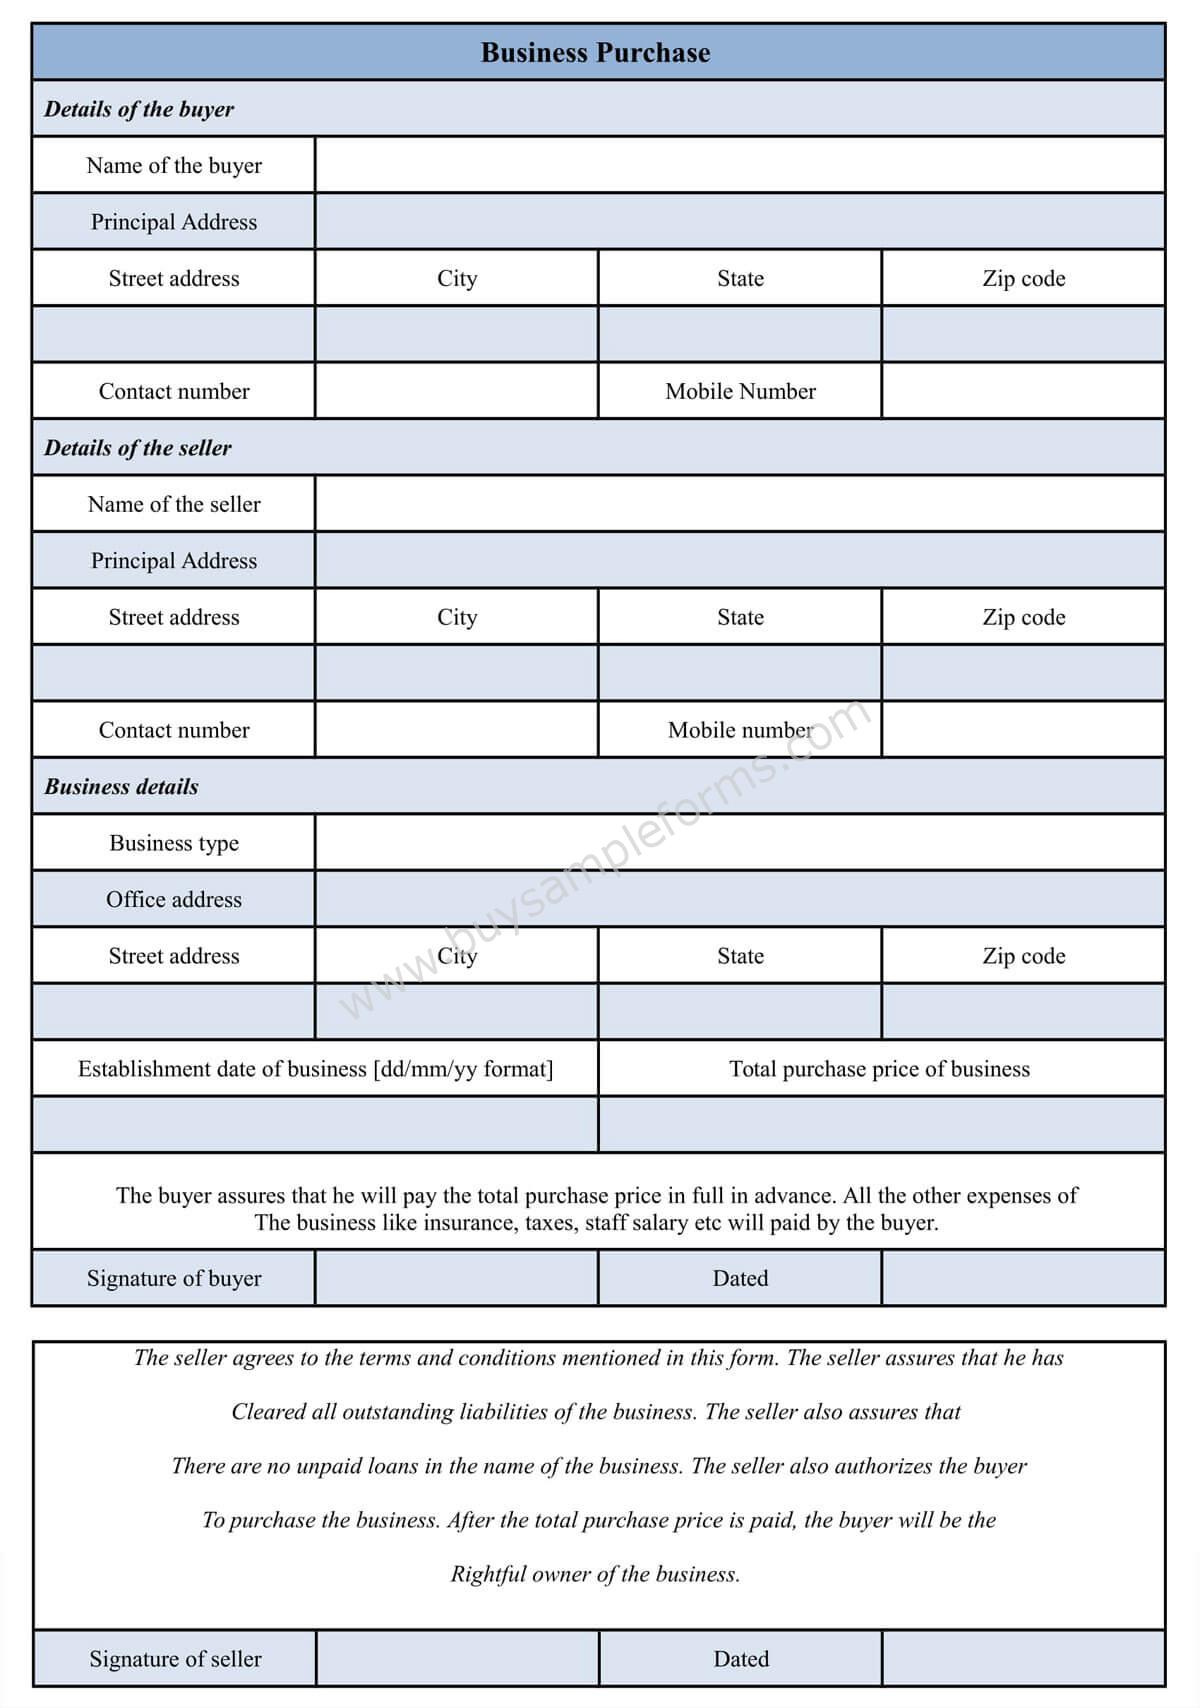 sample Business Purchase Form template word